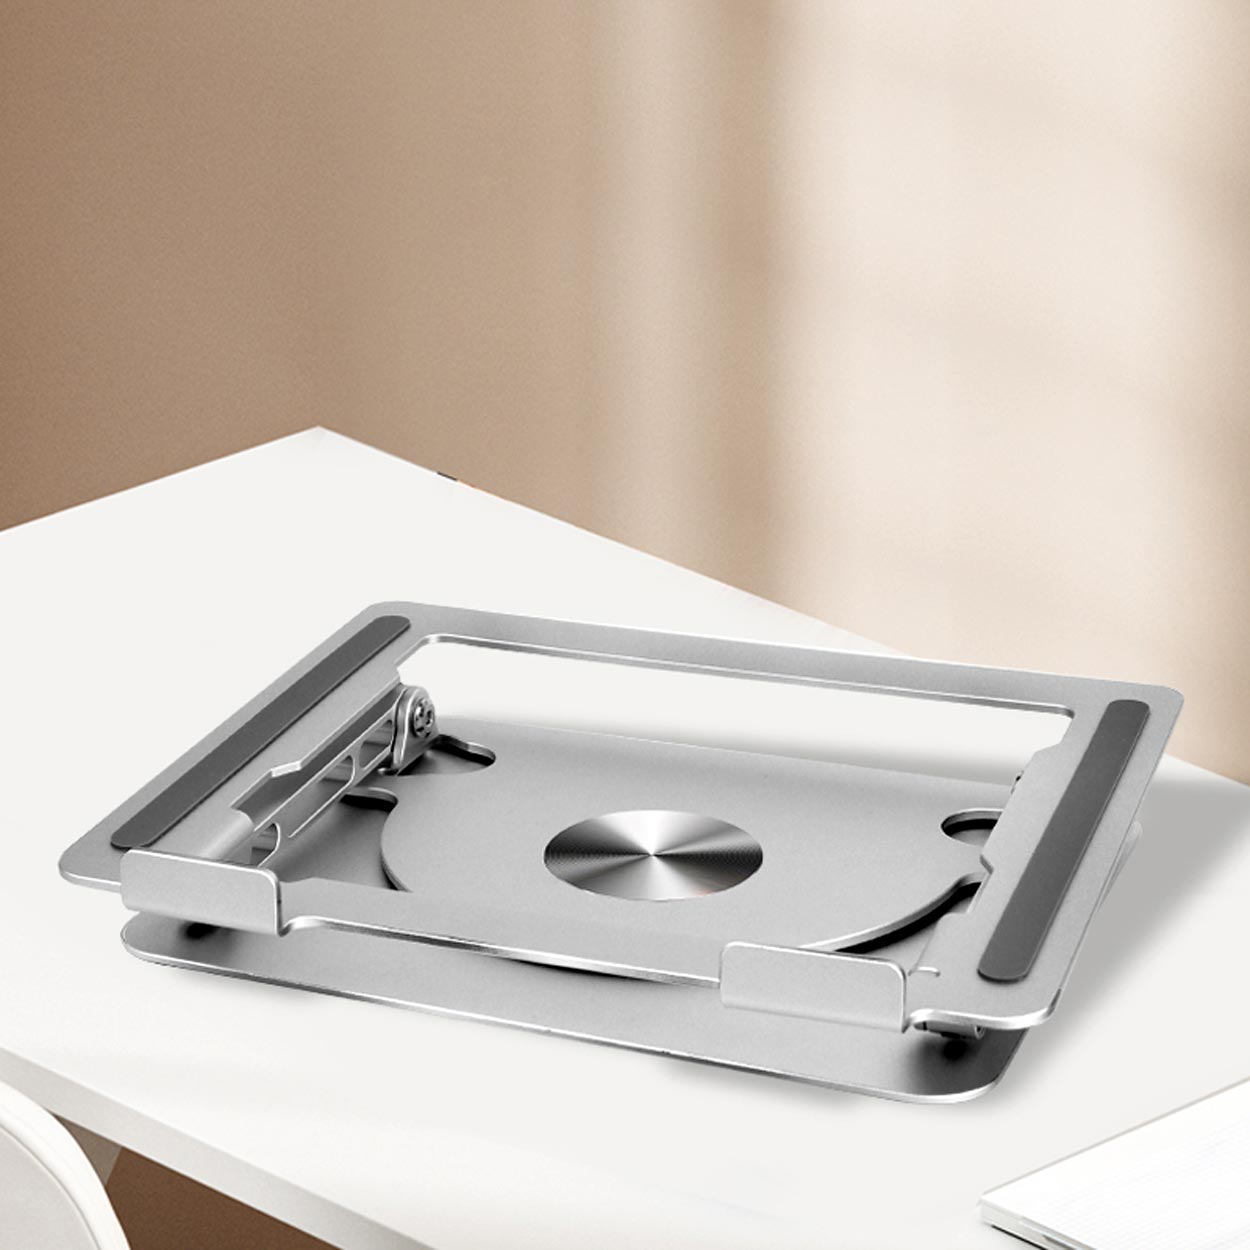 Adjustable Laptop Stand with 360 Rotating Base - 3